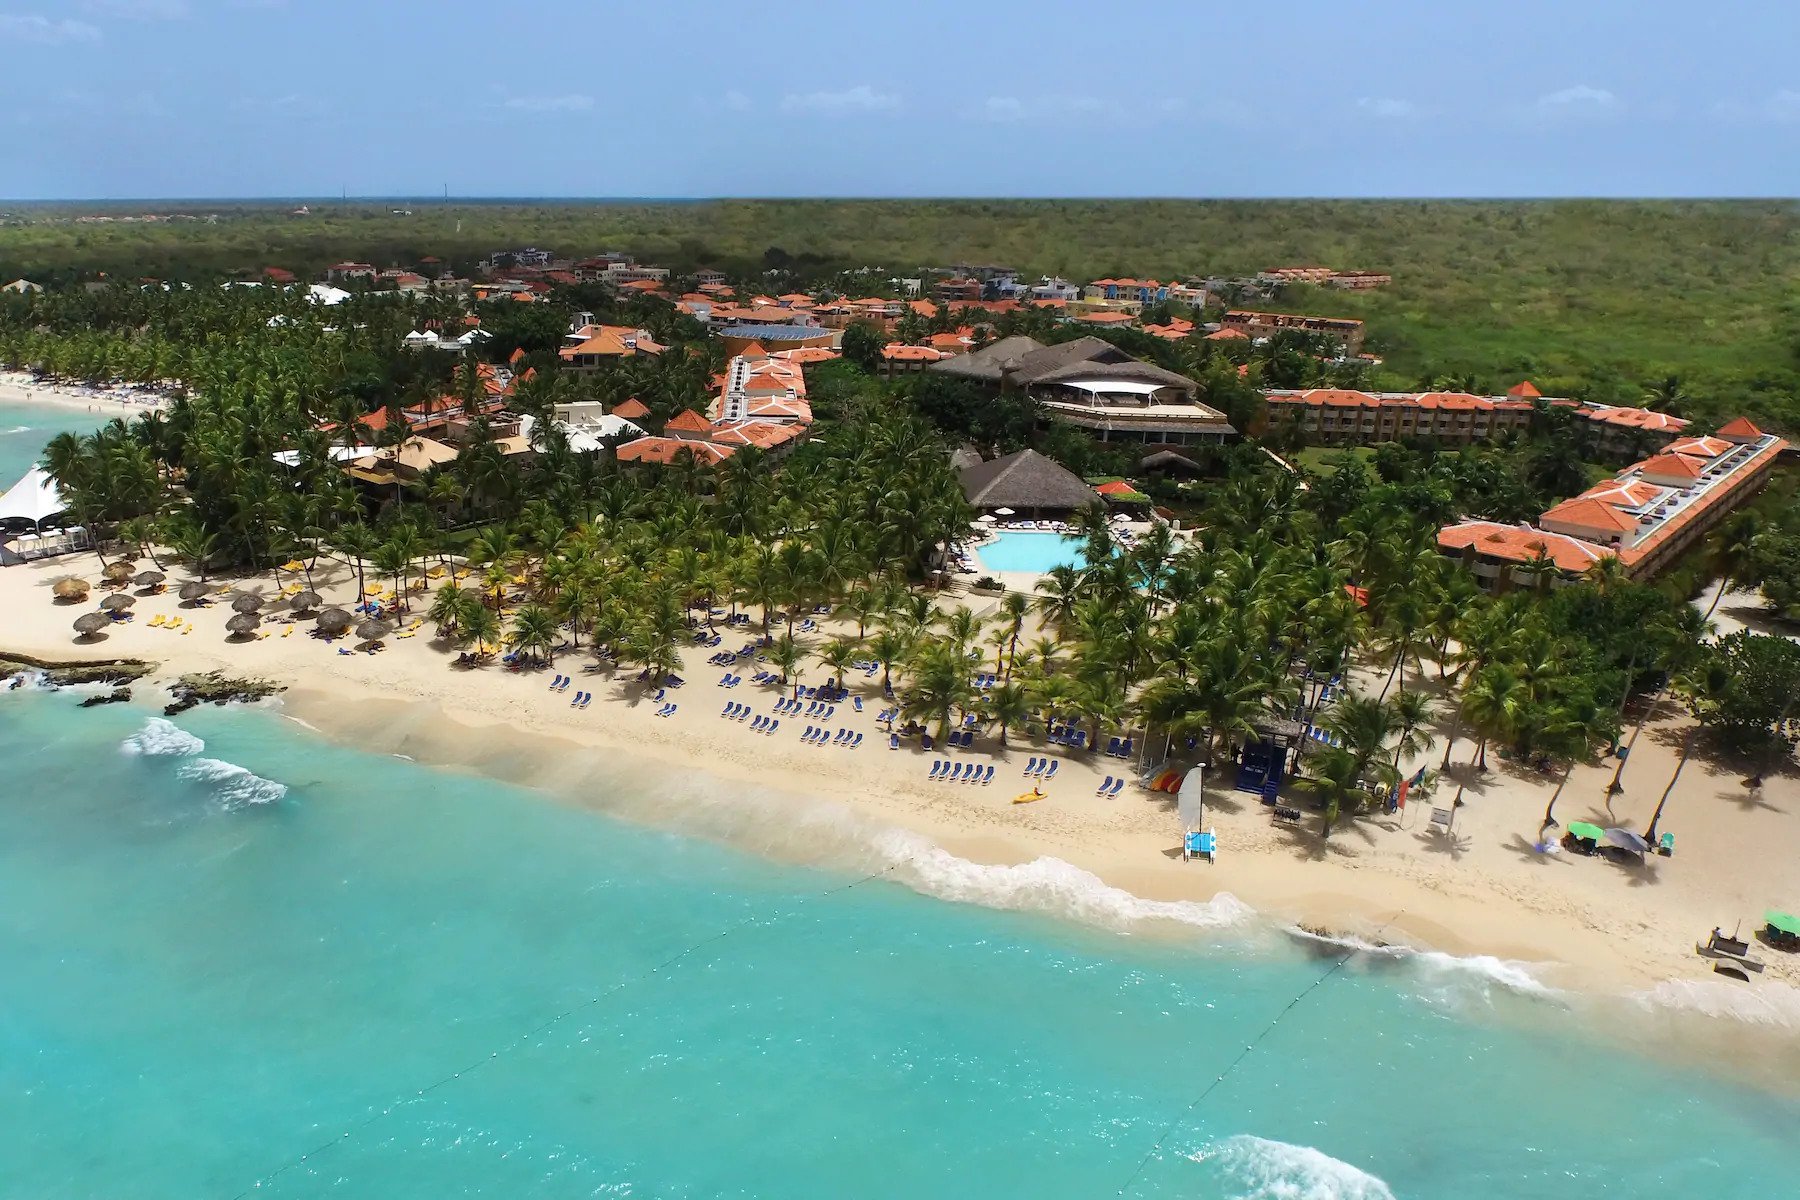 Book your wedding day in Viva Wyndham Dominicus Palace